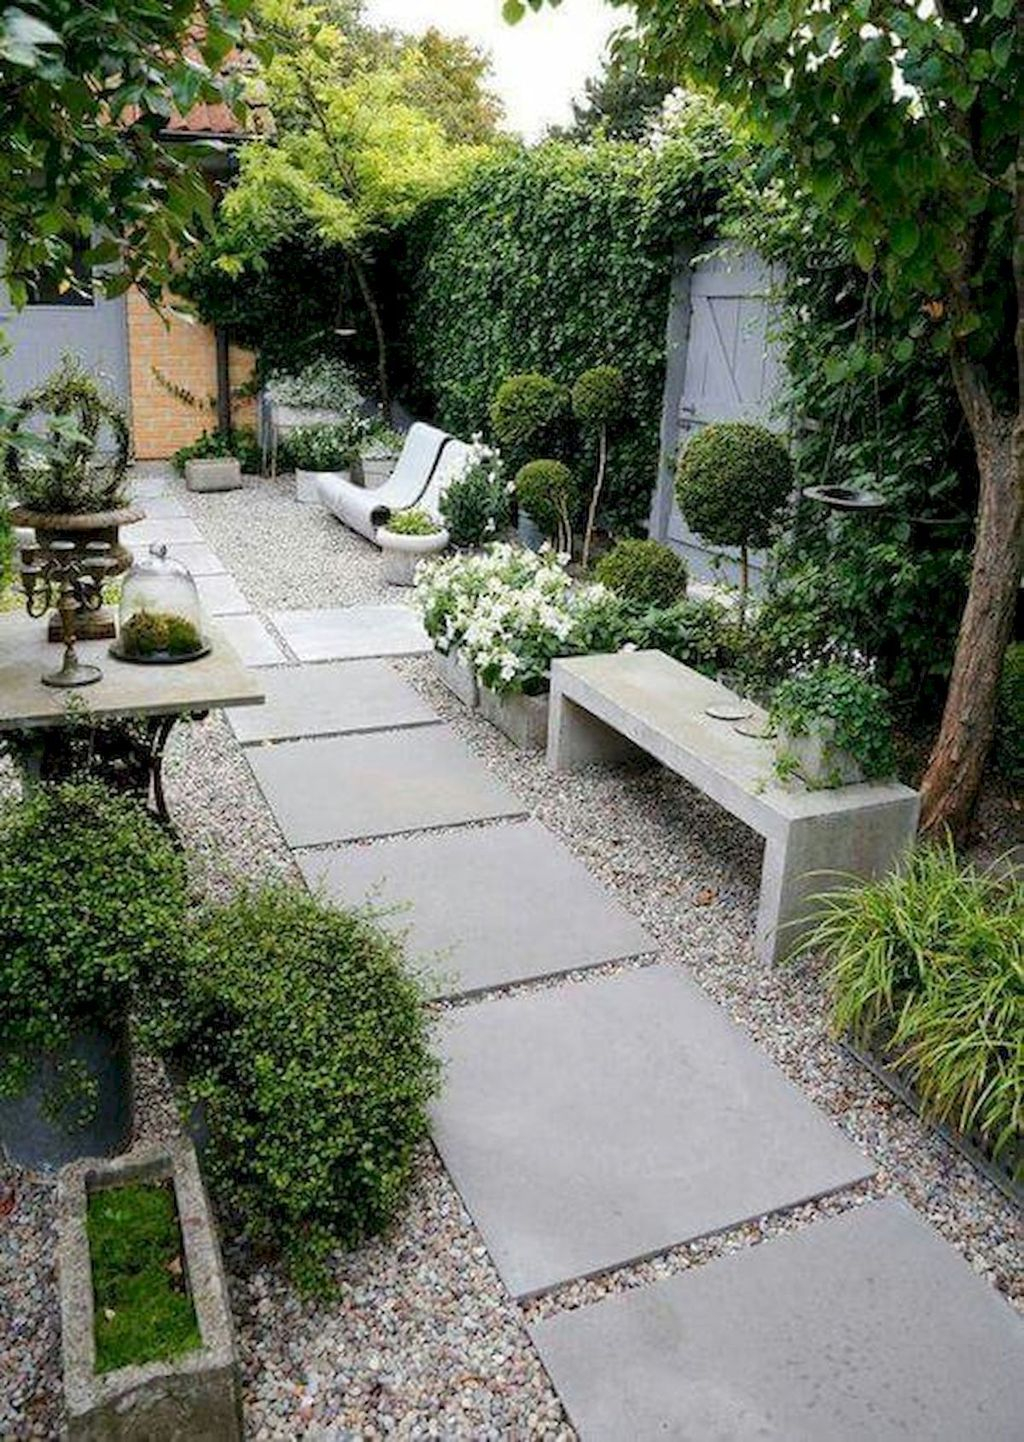 Outstanding Garden Design Ideas With Best Style To Try10